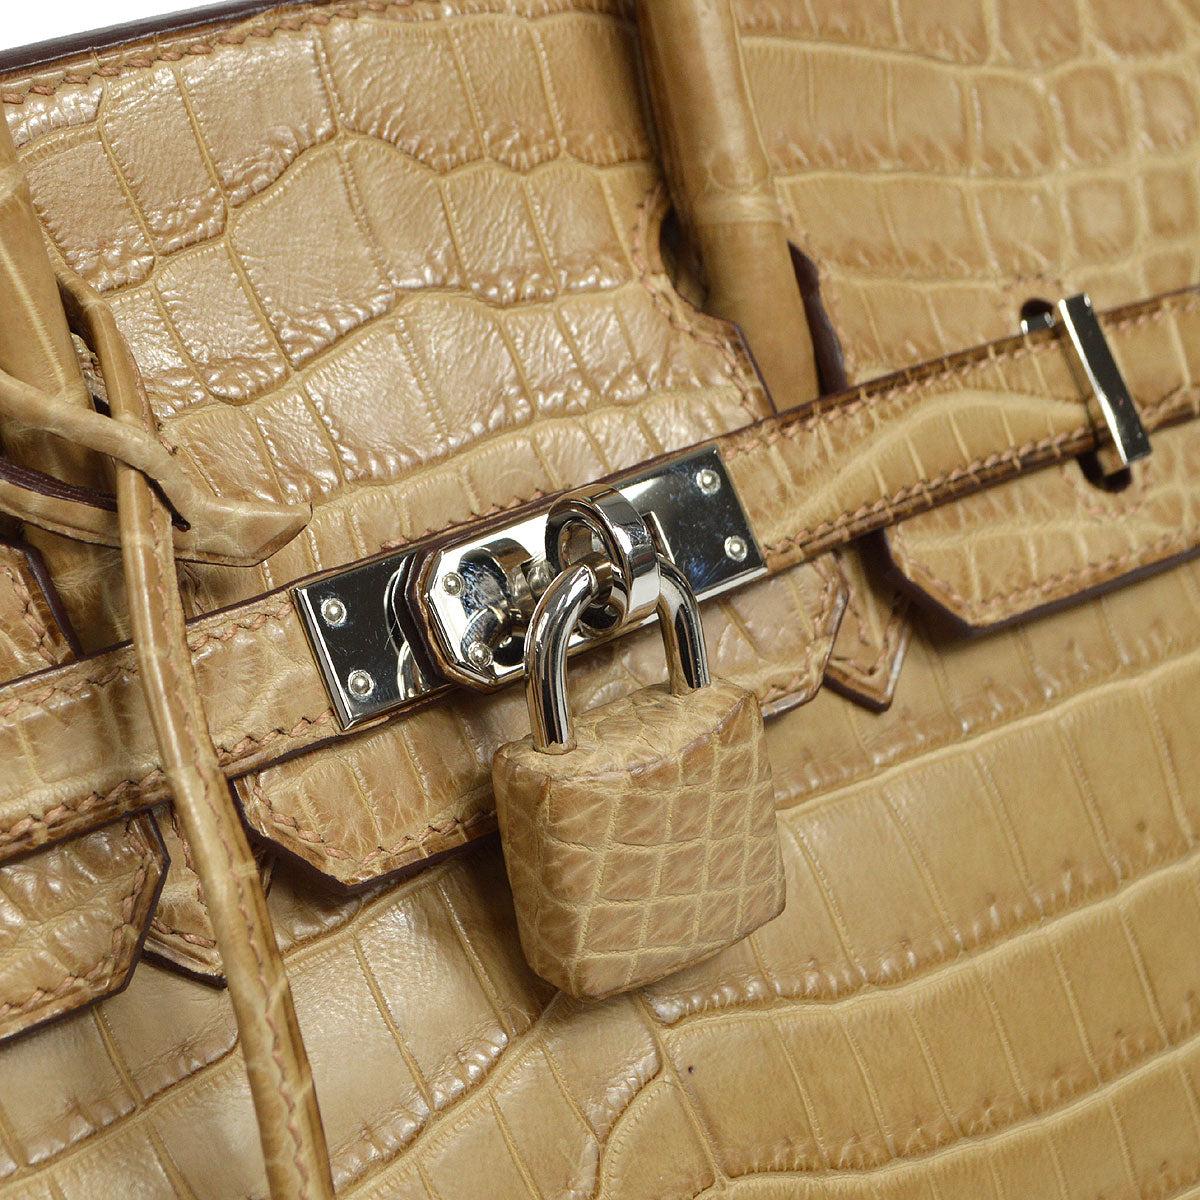 Pre-Owned Vintage Condition
From 2011 Collection
Pousiere 
Niloticus Crocodile
Includes Dust Bag, Box, Padlock, Keys, Key Cover, Rain Cover
W 9.4